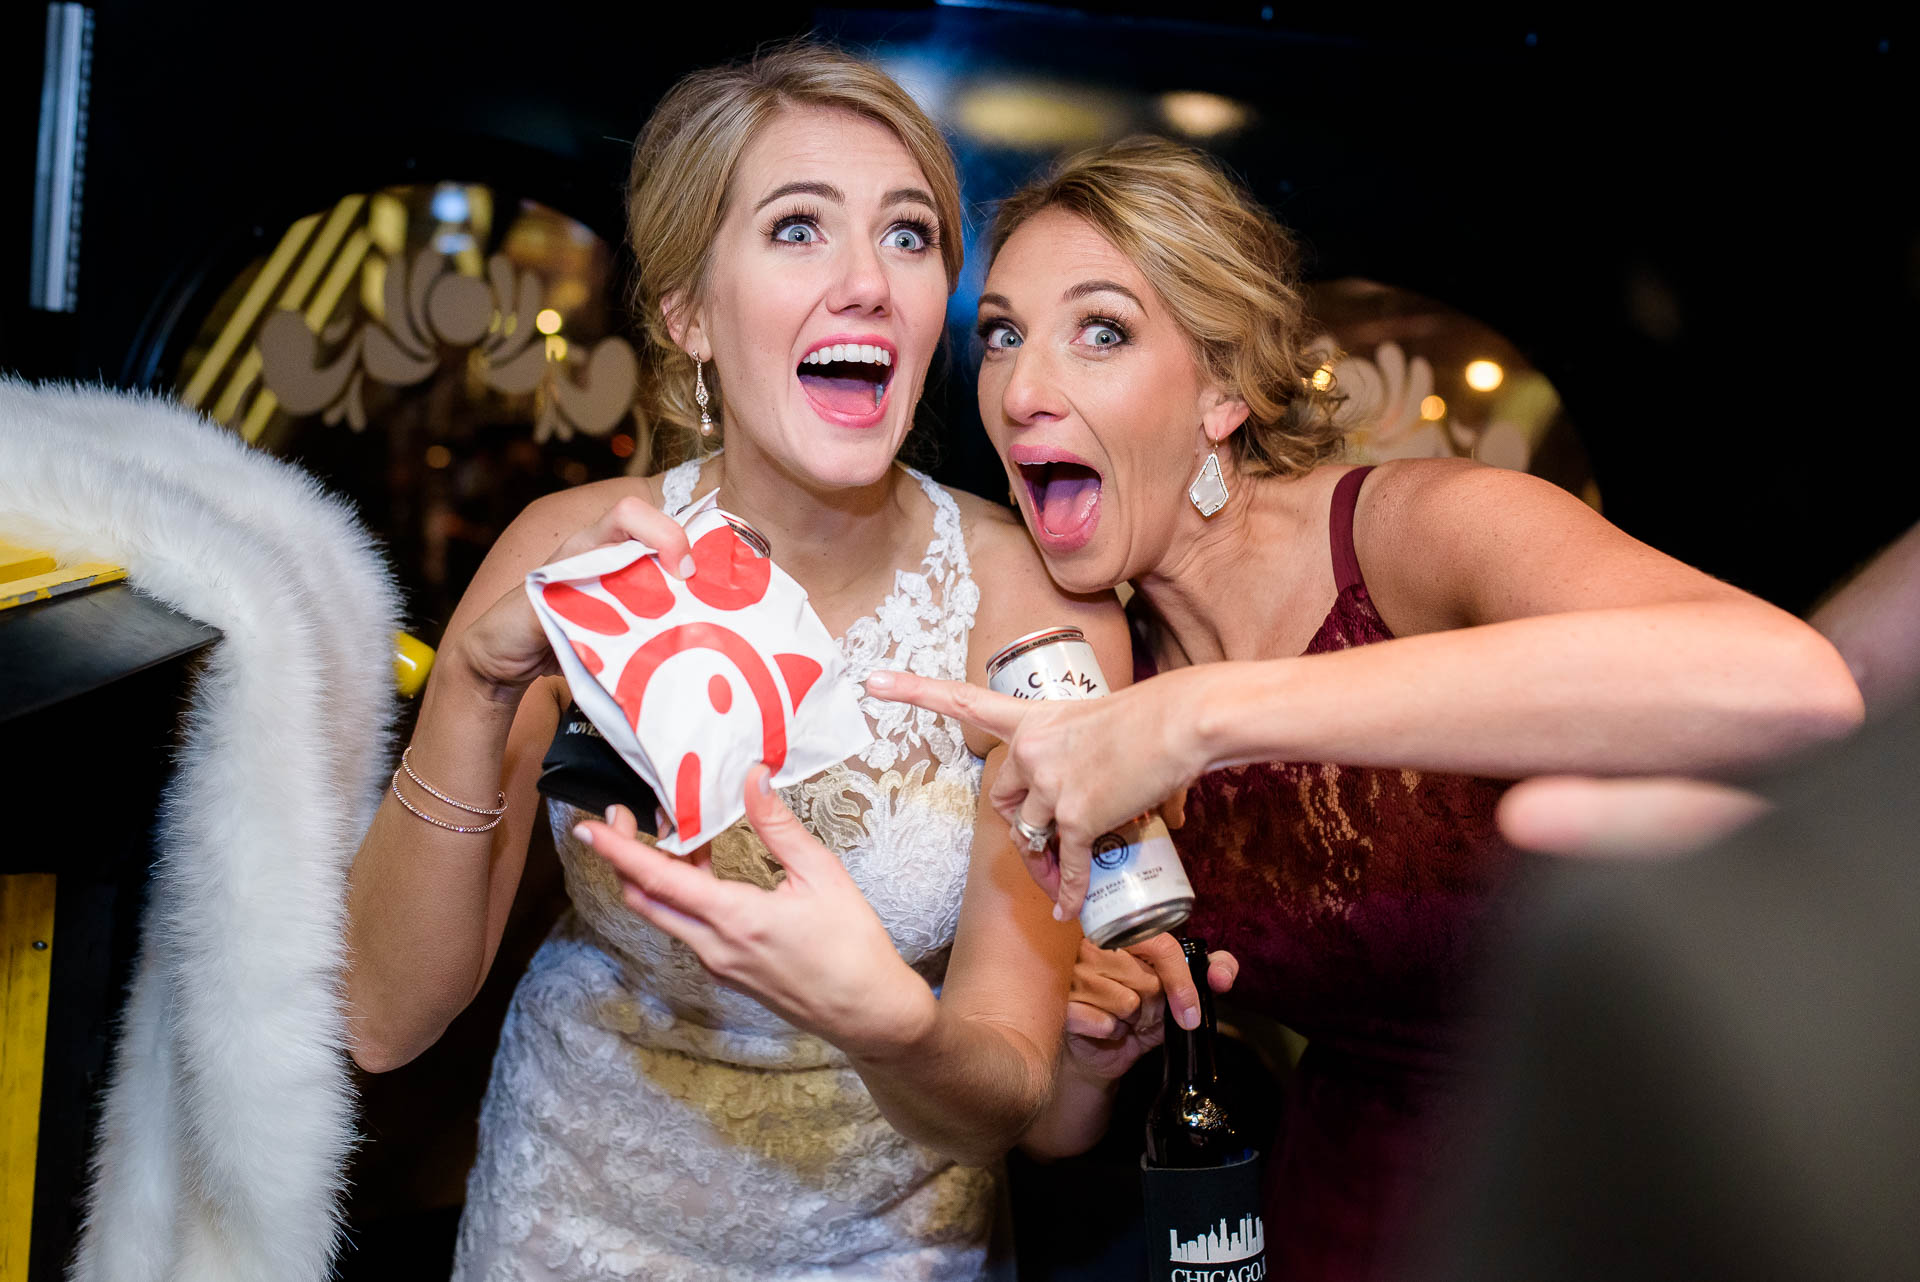 Bride and maid of honor with Chic Filet during a Mid America Club wedding in Chicago.